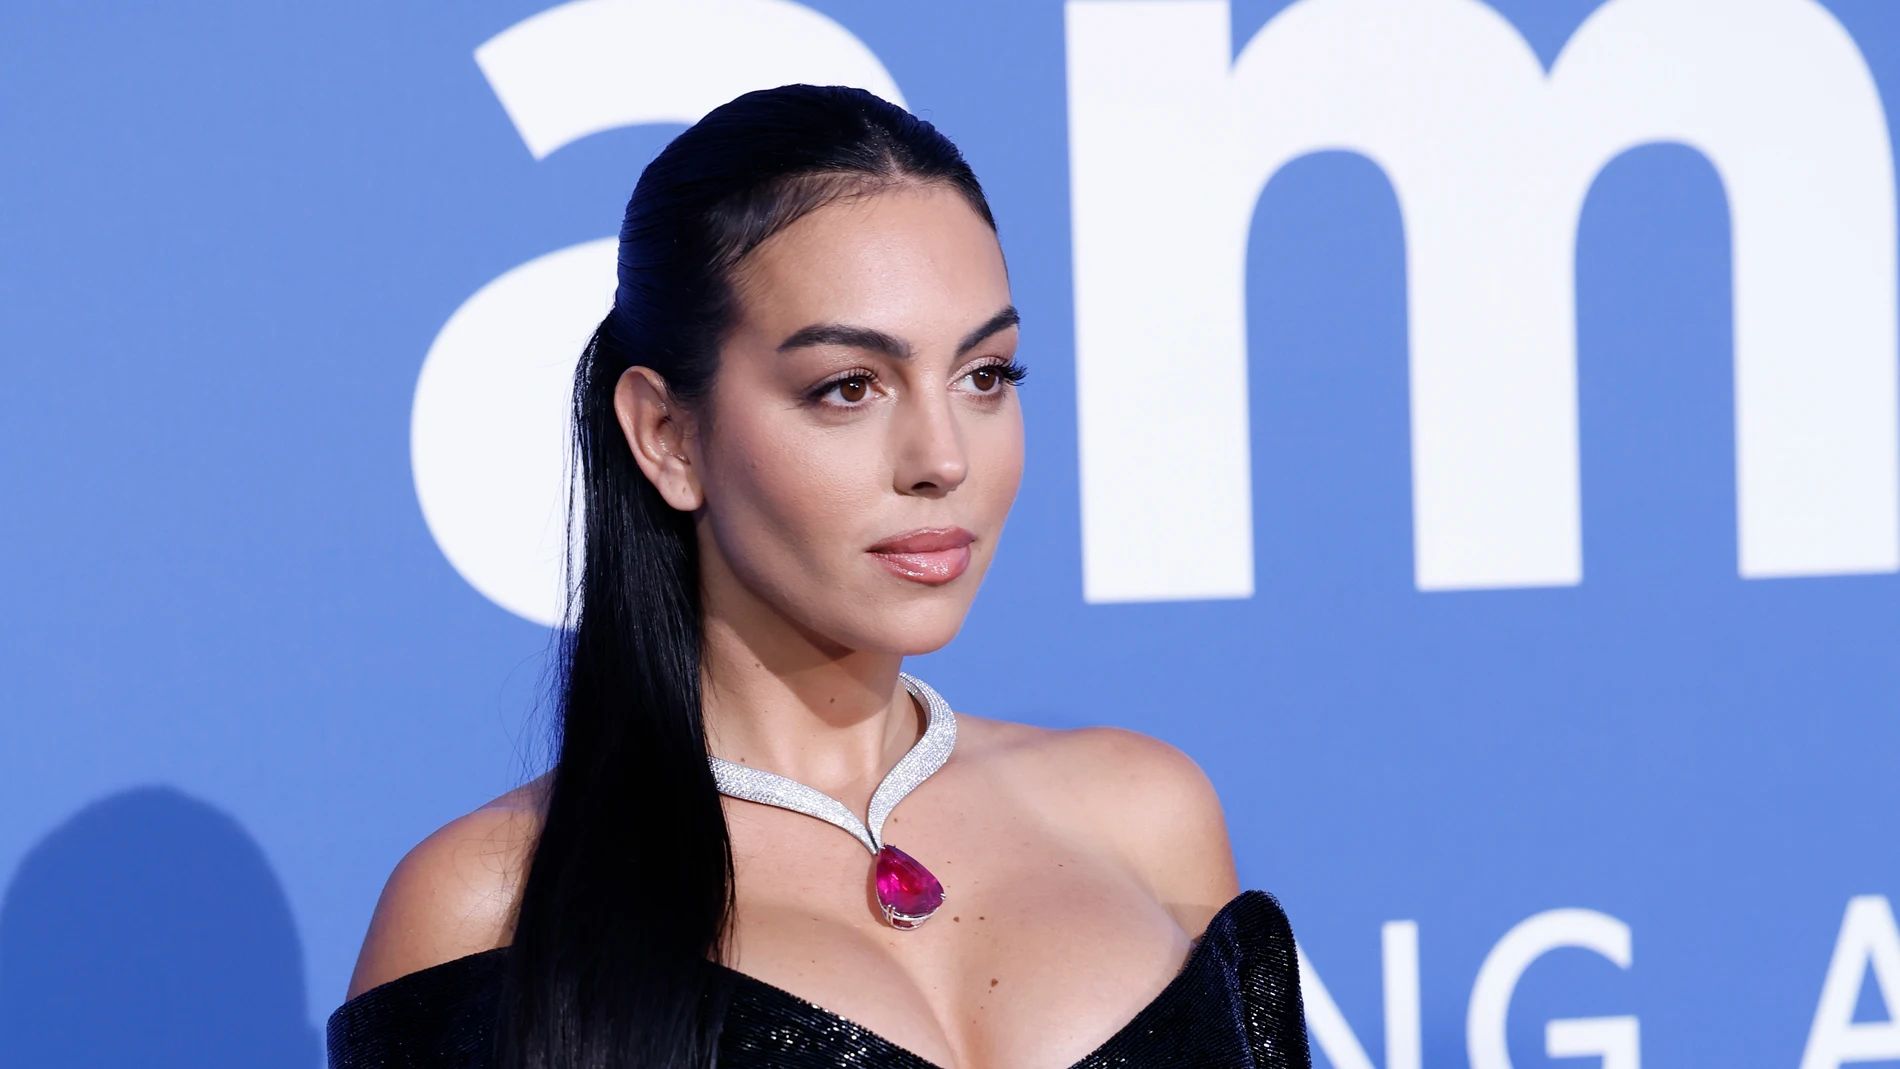 Cap D'antibes (France), 25/05/2023.- Georgina Rodriguez attends the Cinema Against AIDS amfAR Gala within the scope of the 76th annual Cannes Film Festival, at the 'Hotel du Cap-Eden-Roc' in Cap d'Antibes, France, 25 May 2023. The nonprofit organization American Foundation for AIDS Research (amfAR) was created in 1985. (Cine, Cine, Francia) EFE/EPA/SEBASTIEN NOGIER